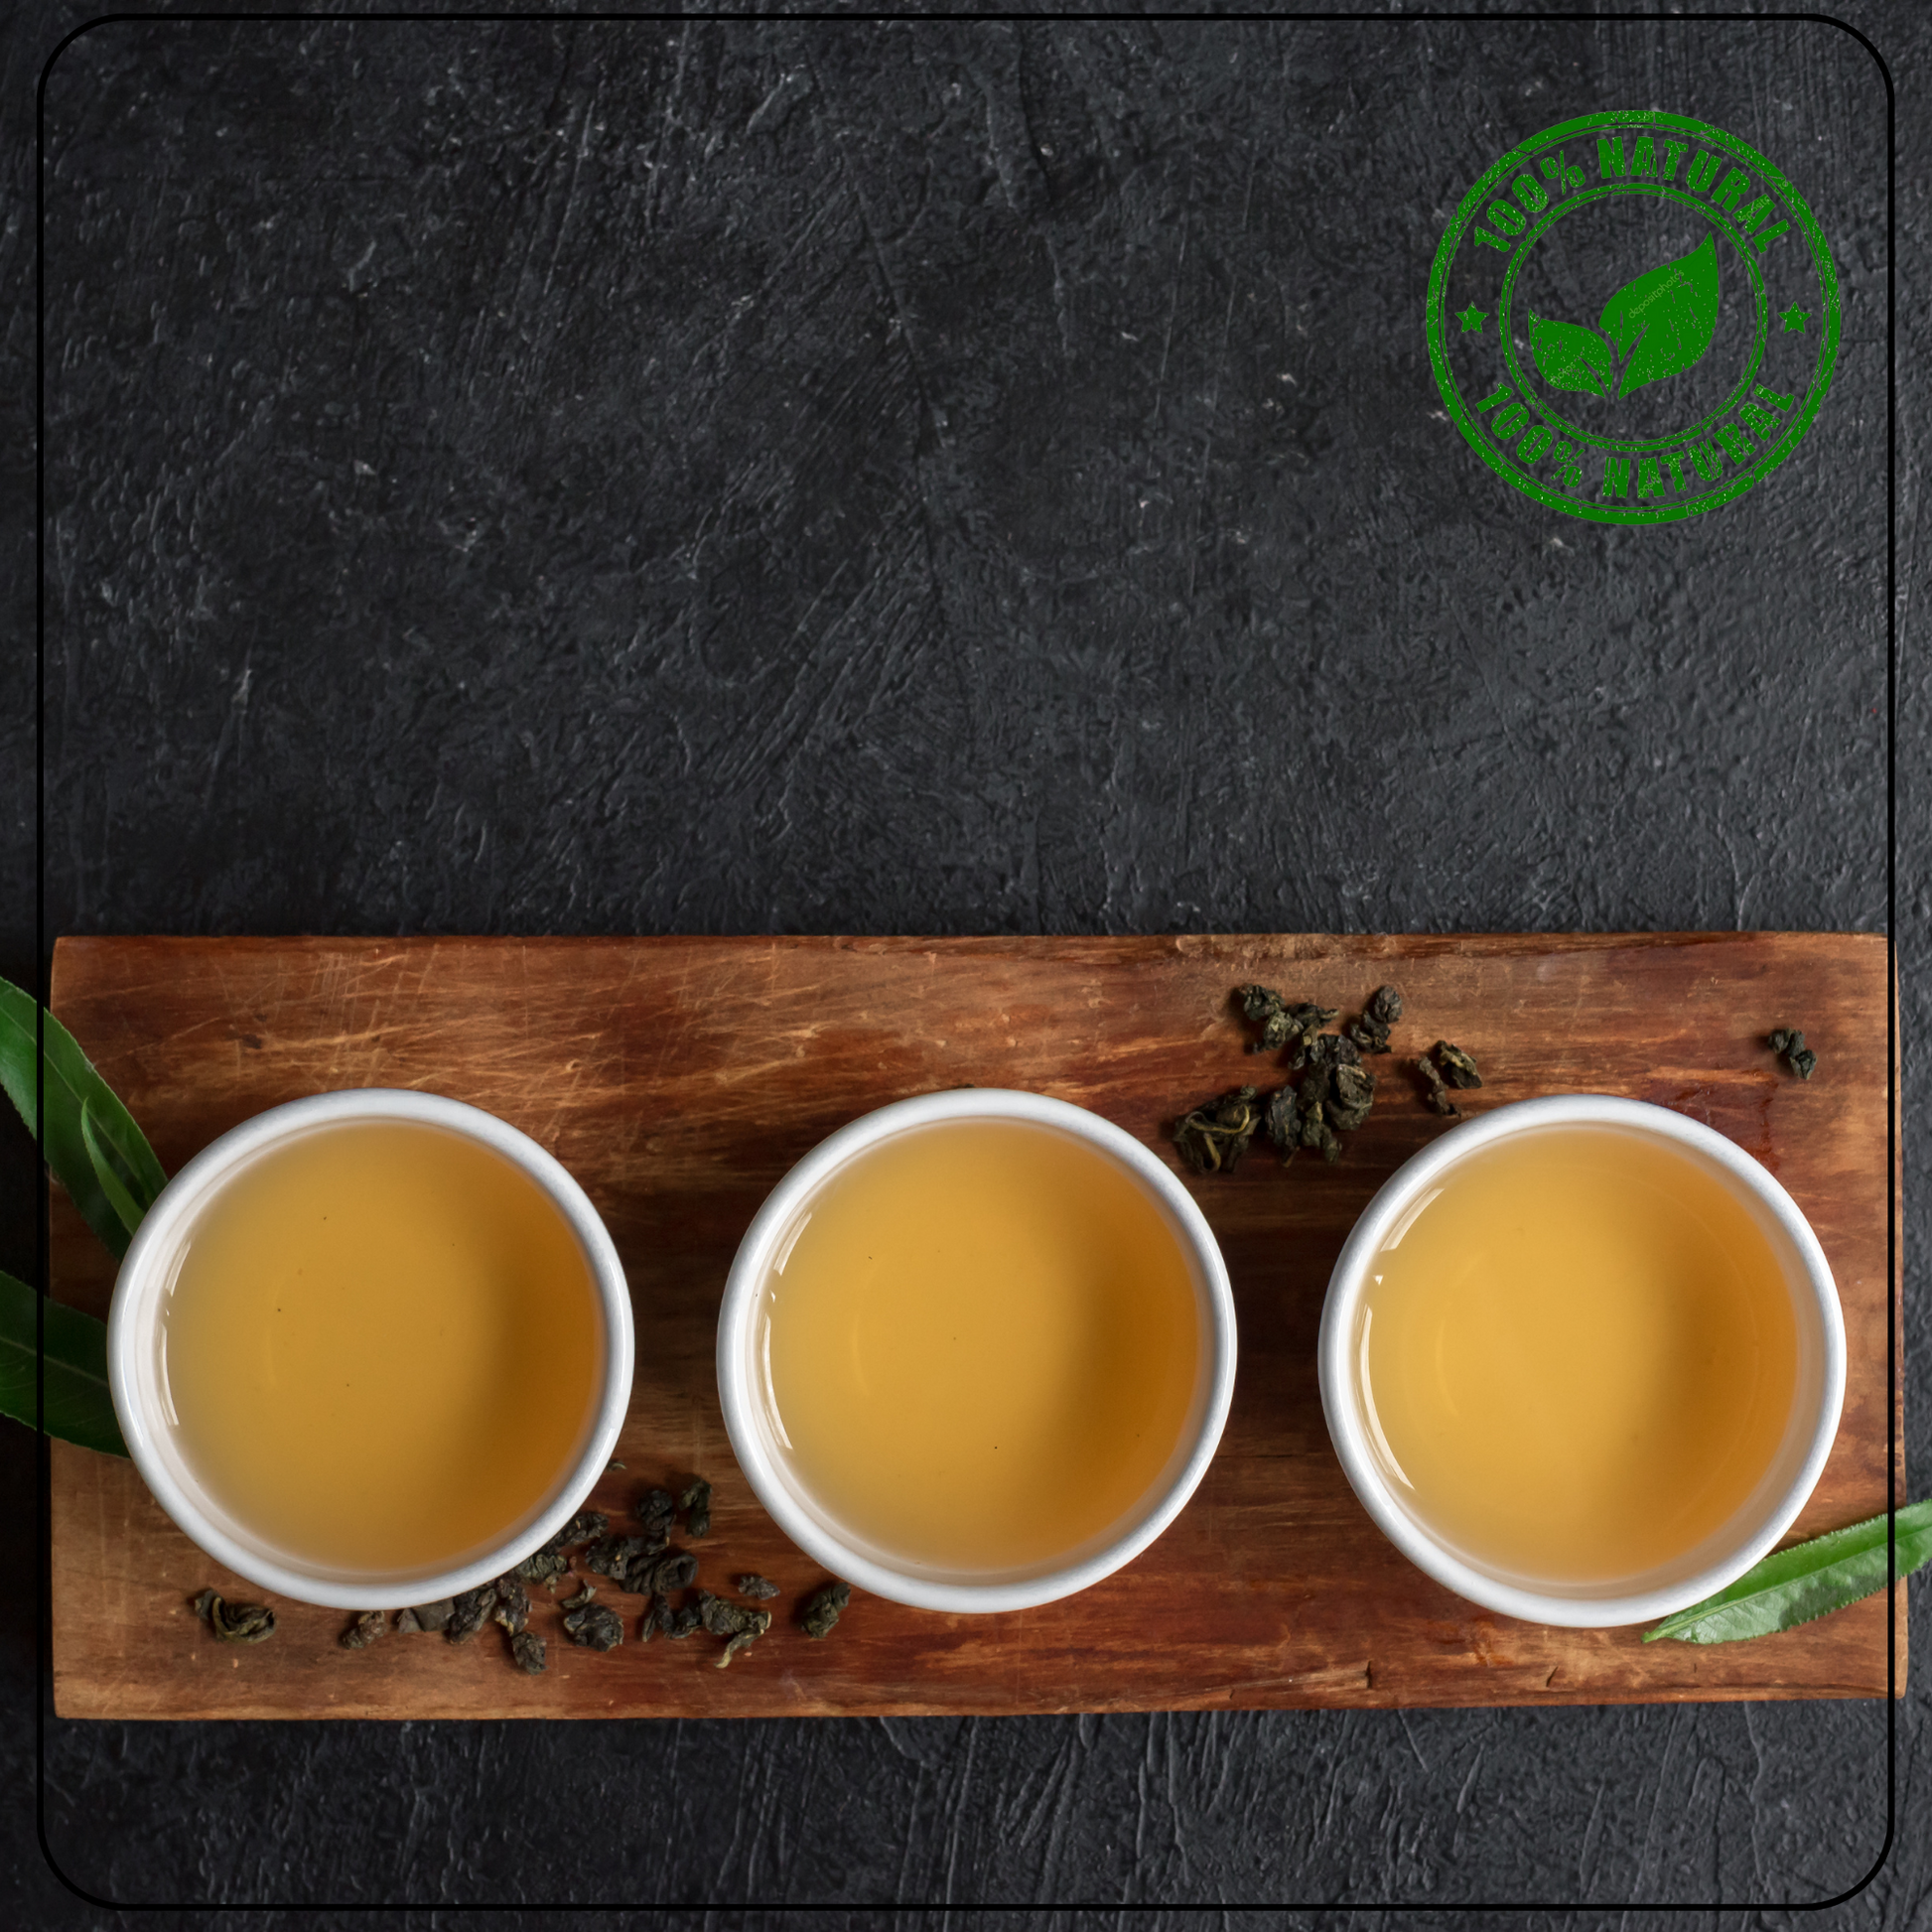 REJUVENATING China Milk Oolong Leaf - A Tea for Relaxation and Vitality - Radhikas Fine Teas and Whatnots